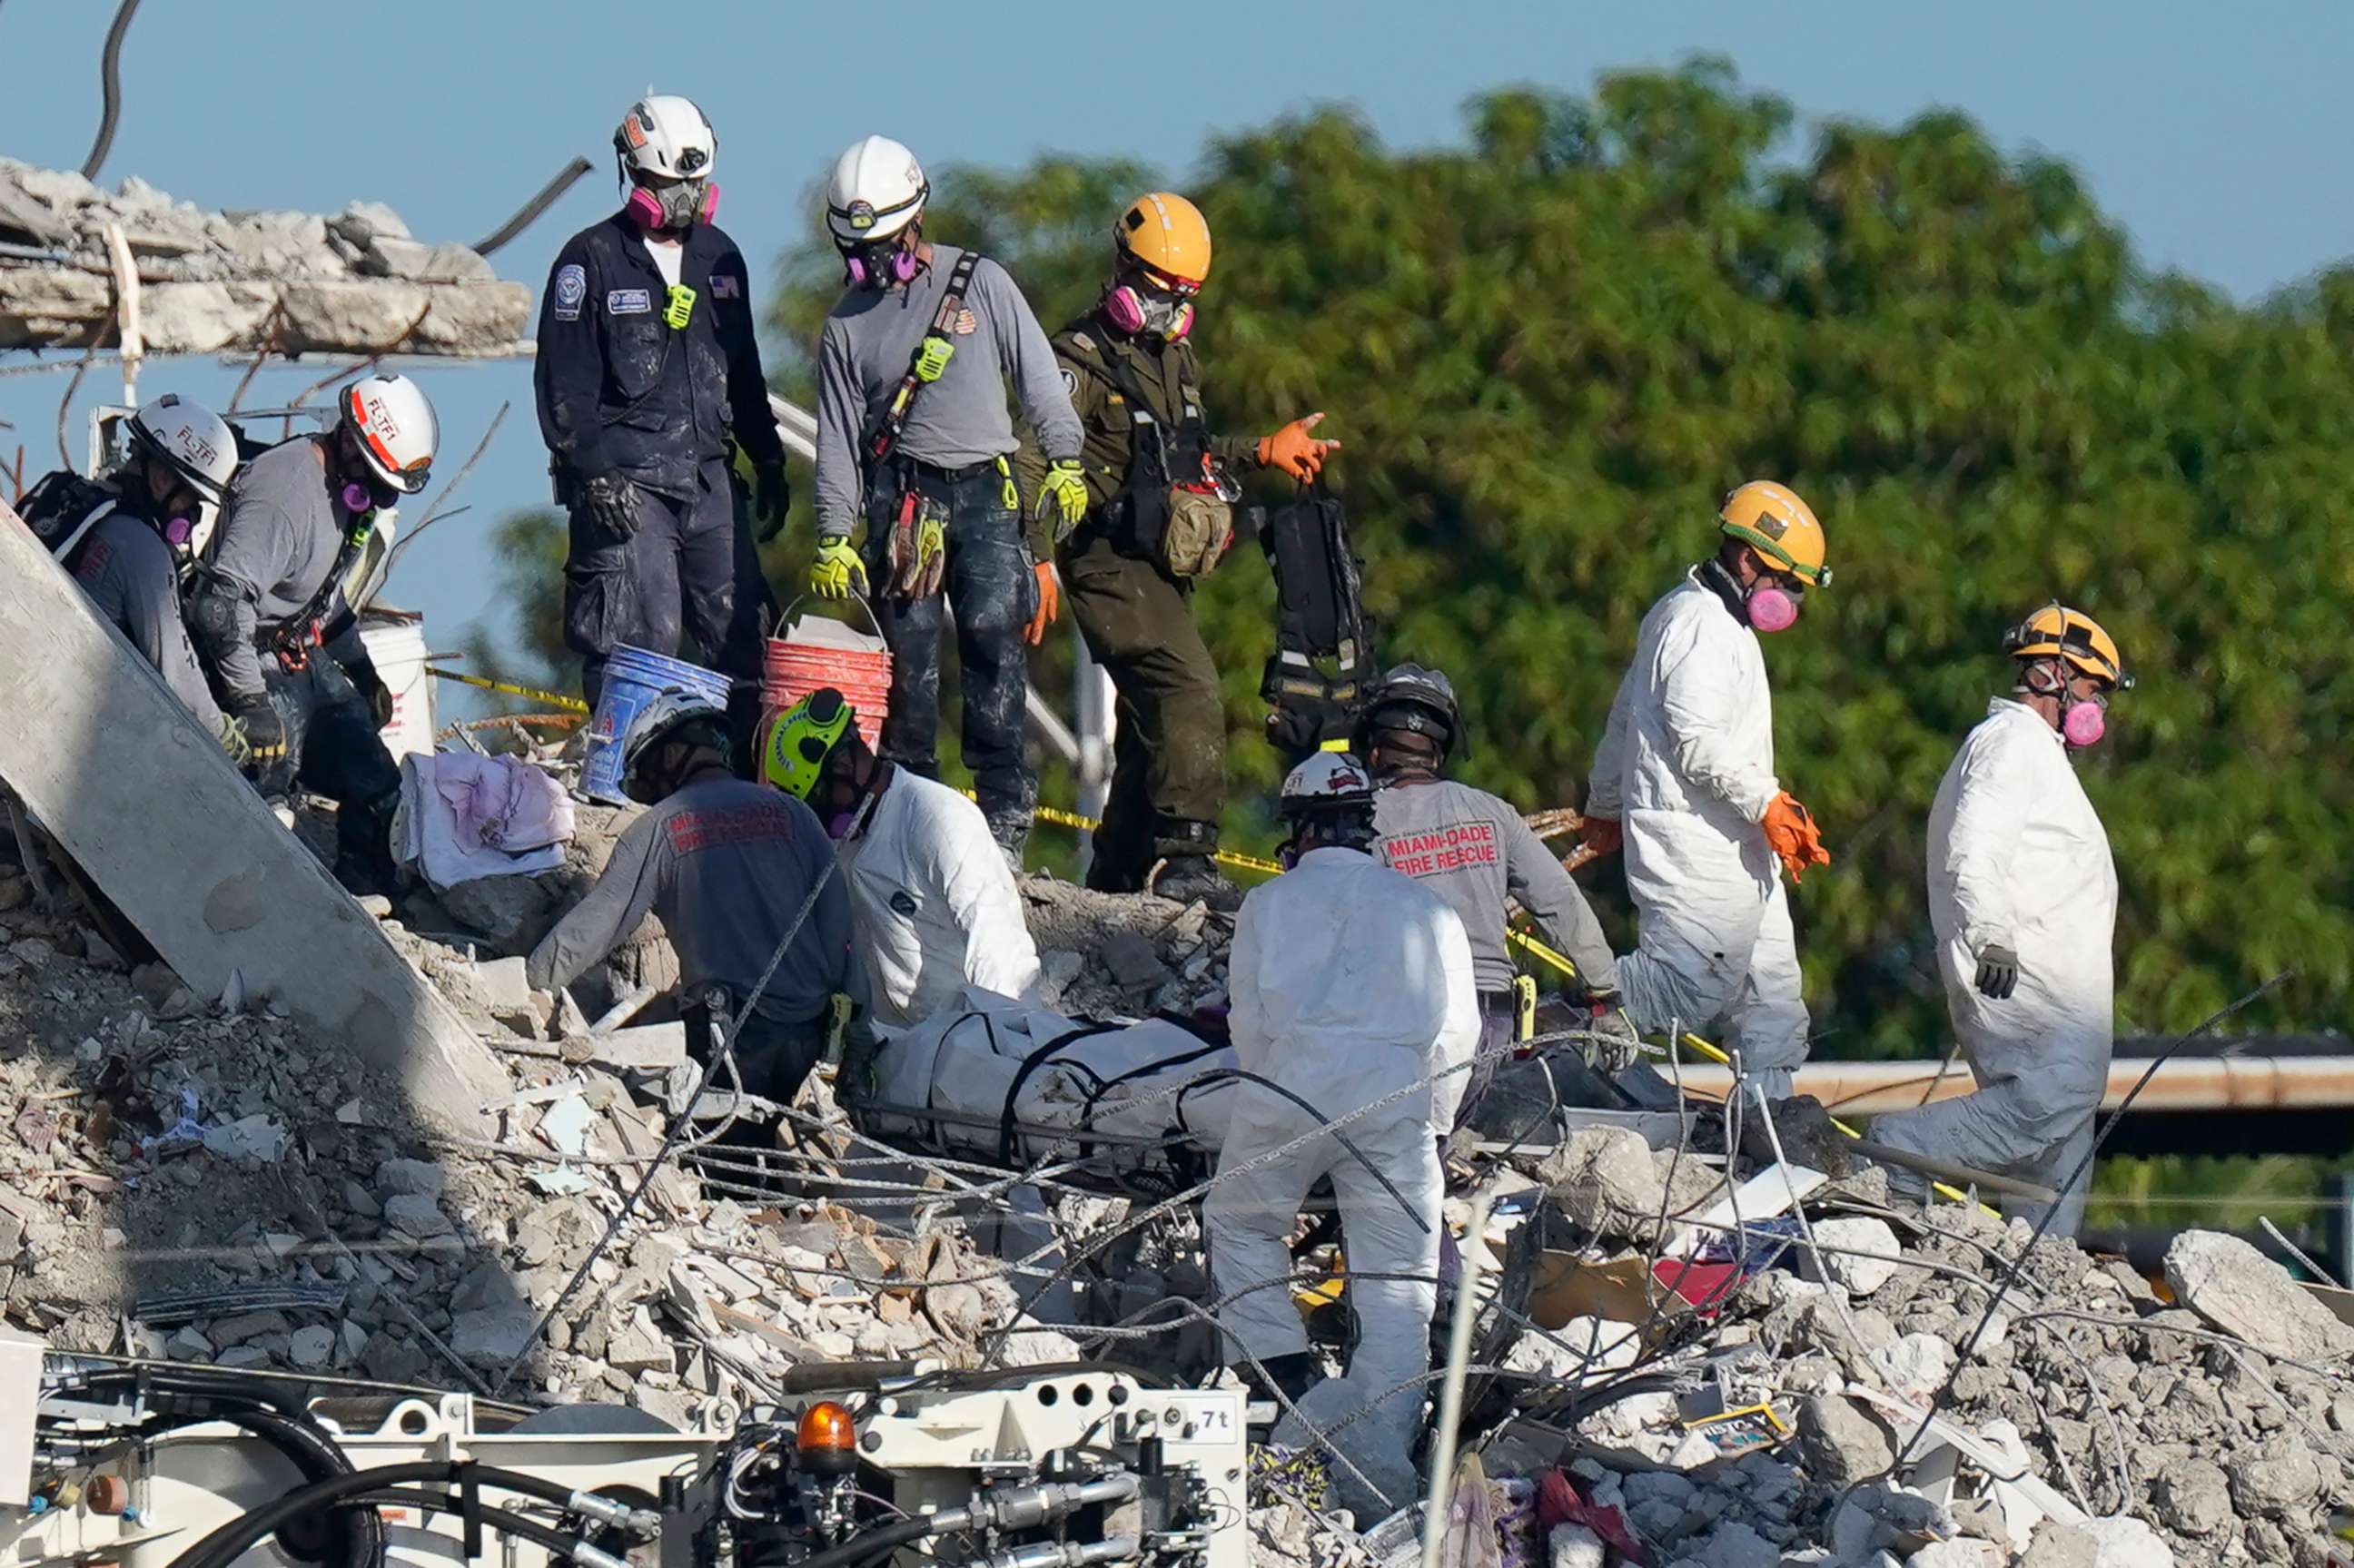 PHOTO: Search and rescue personnel remove remains on a stretcher as they work atop the rubble at the Champlain Towers South condo building where scores of people remain missing more than a week after it partially collapsed, July 2, 2021, in Surfside, Fla.